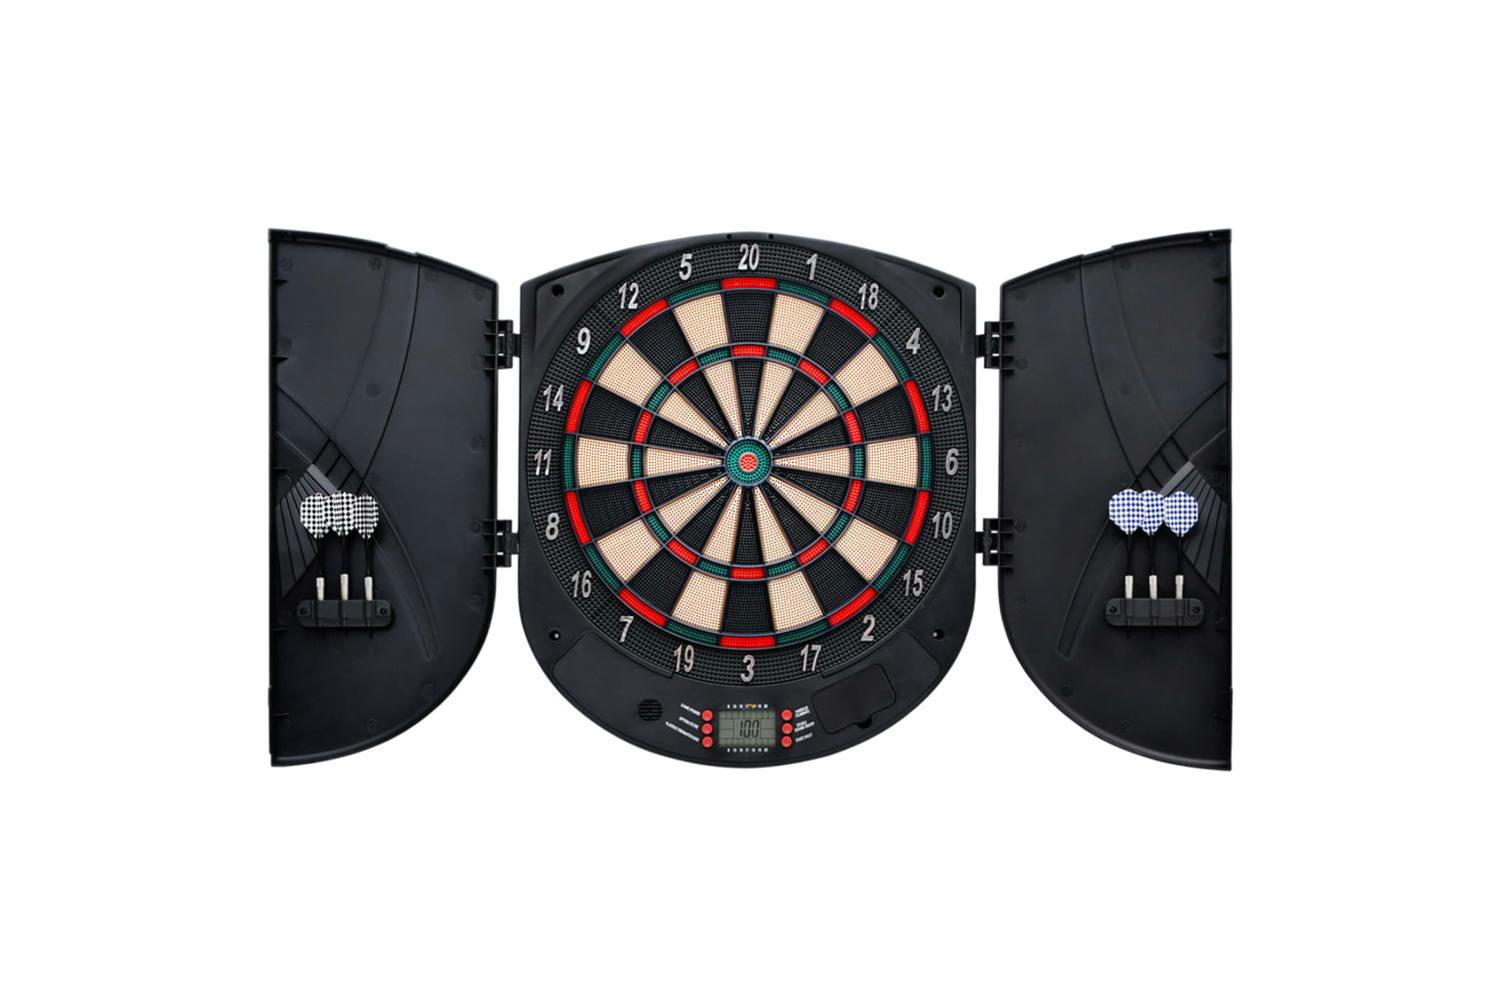 Electronic Dart Board Soft Dart Auto Scoring for Adults Throwing Game  Electric